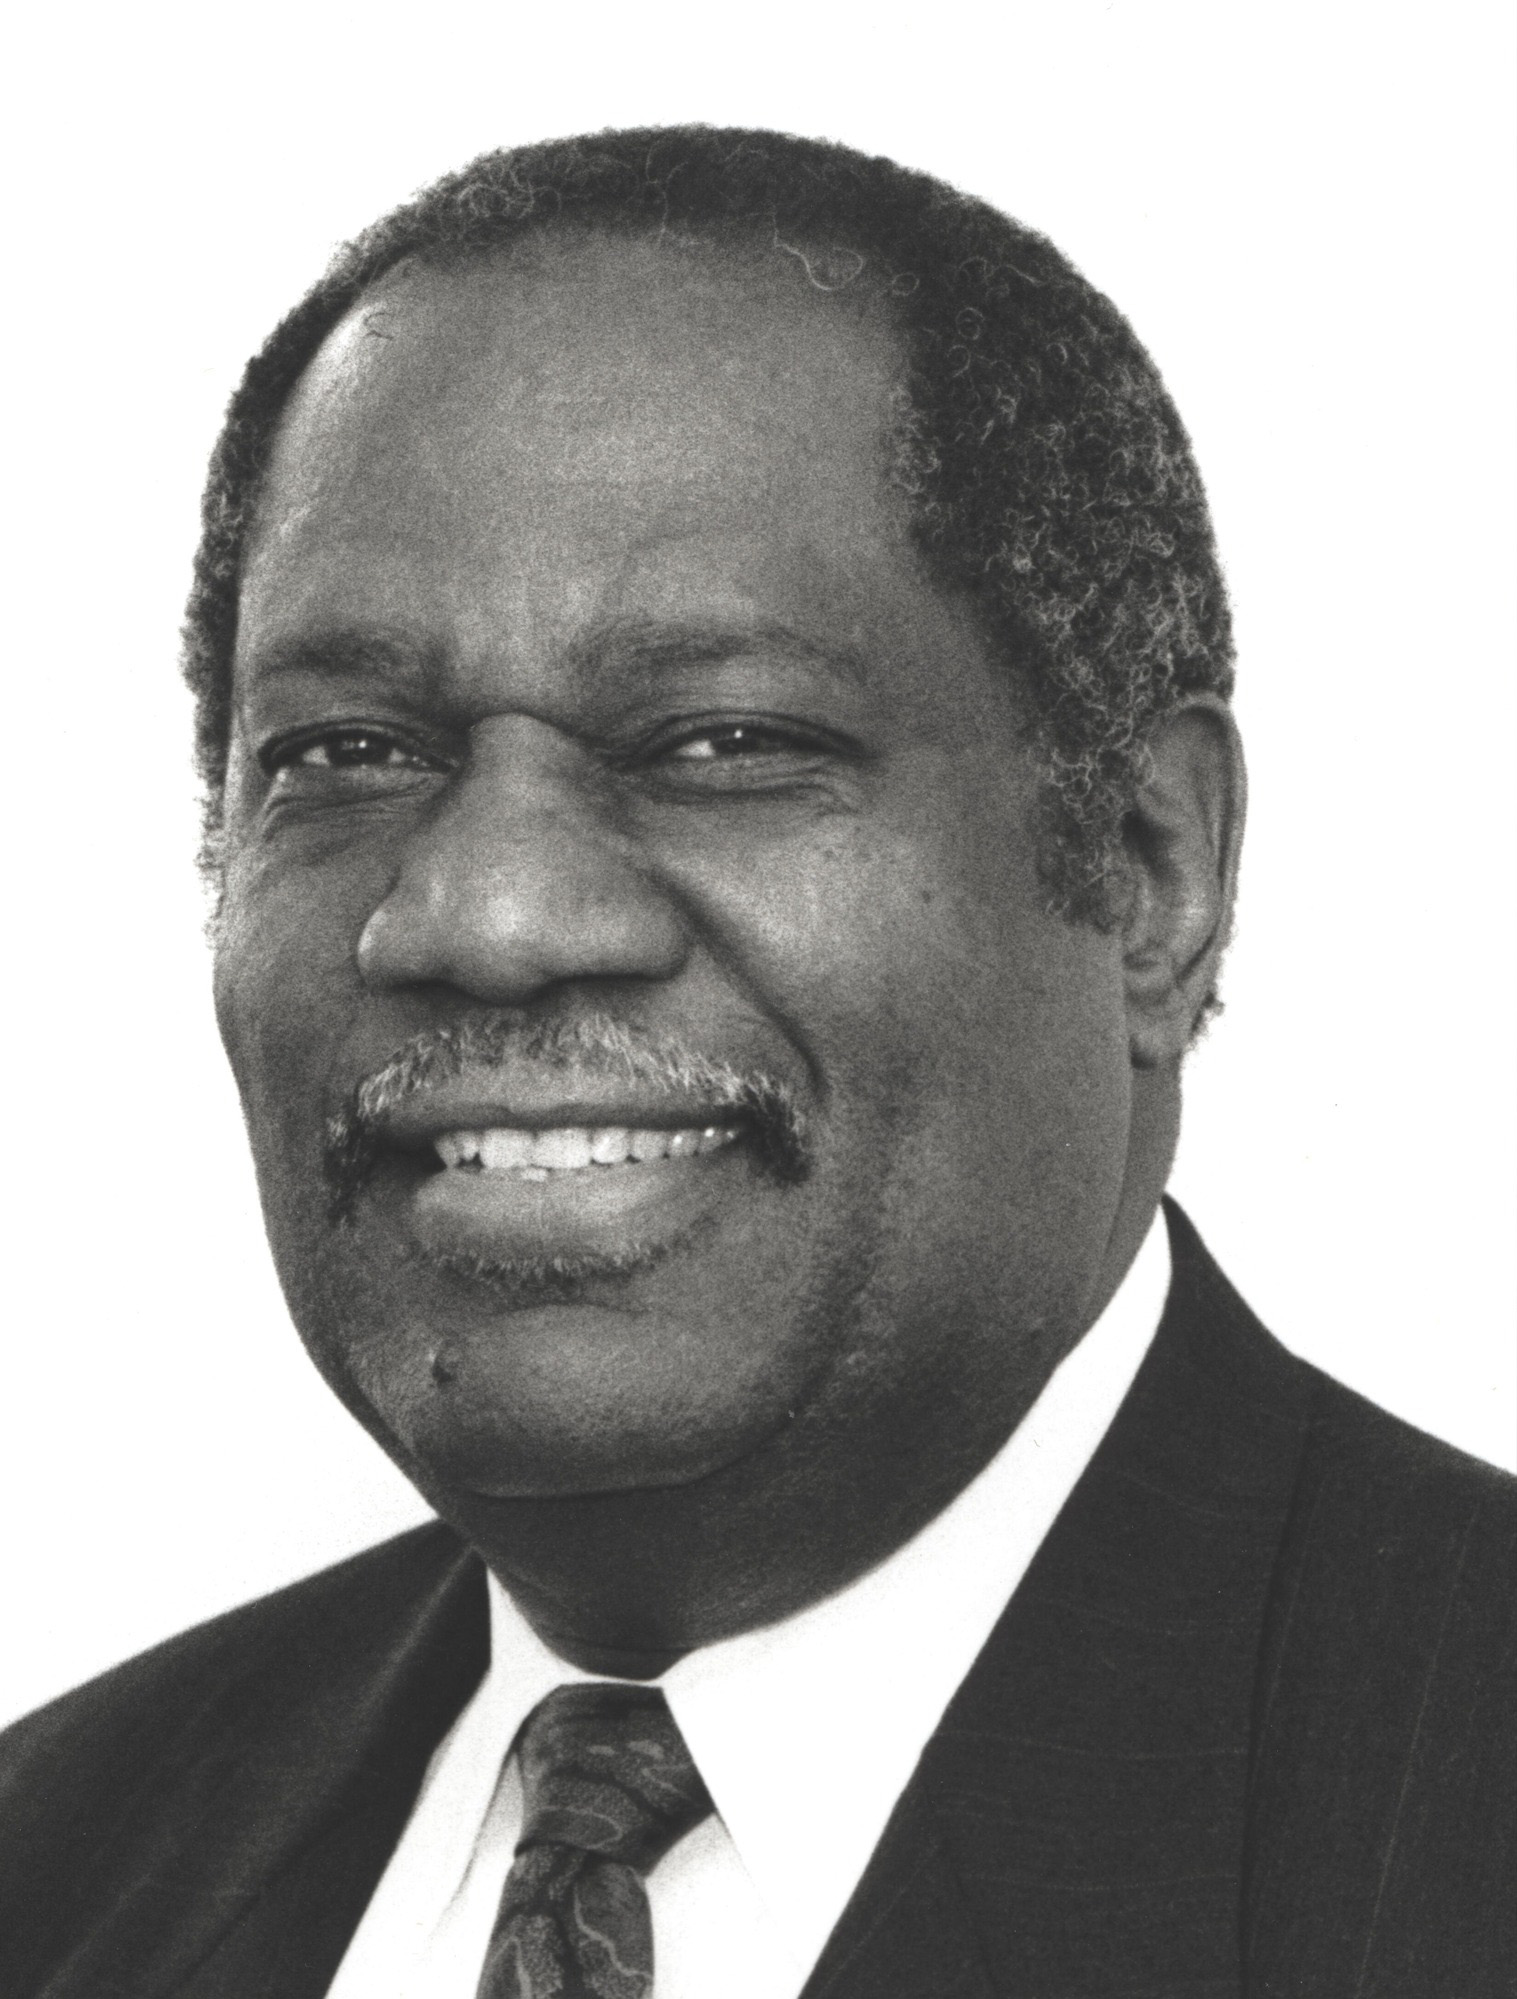 Head shot of smiling Black man in suit and tie.